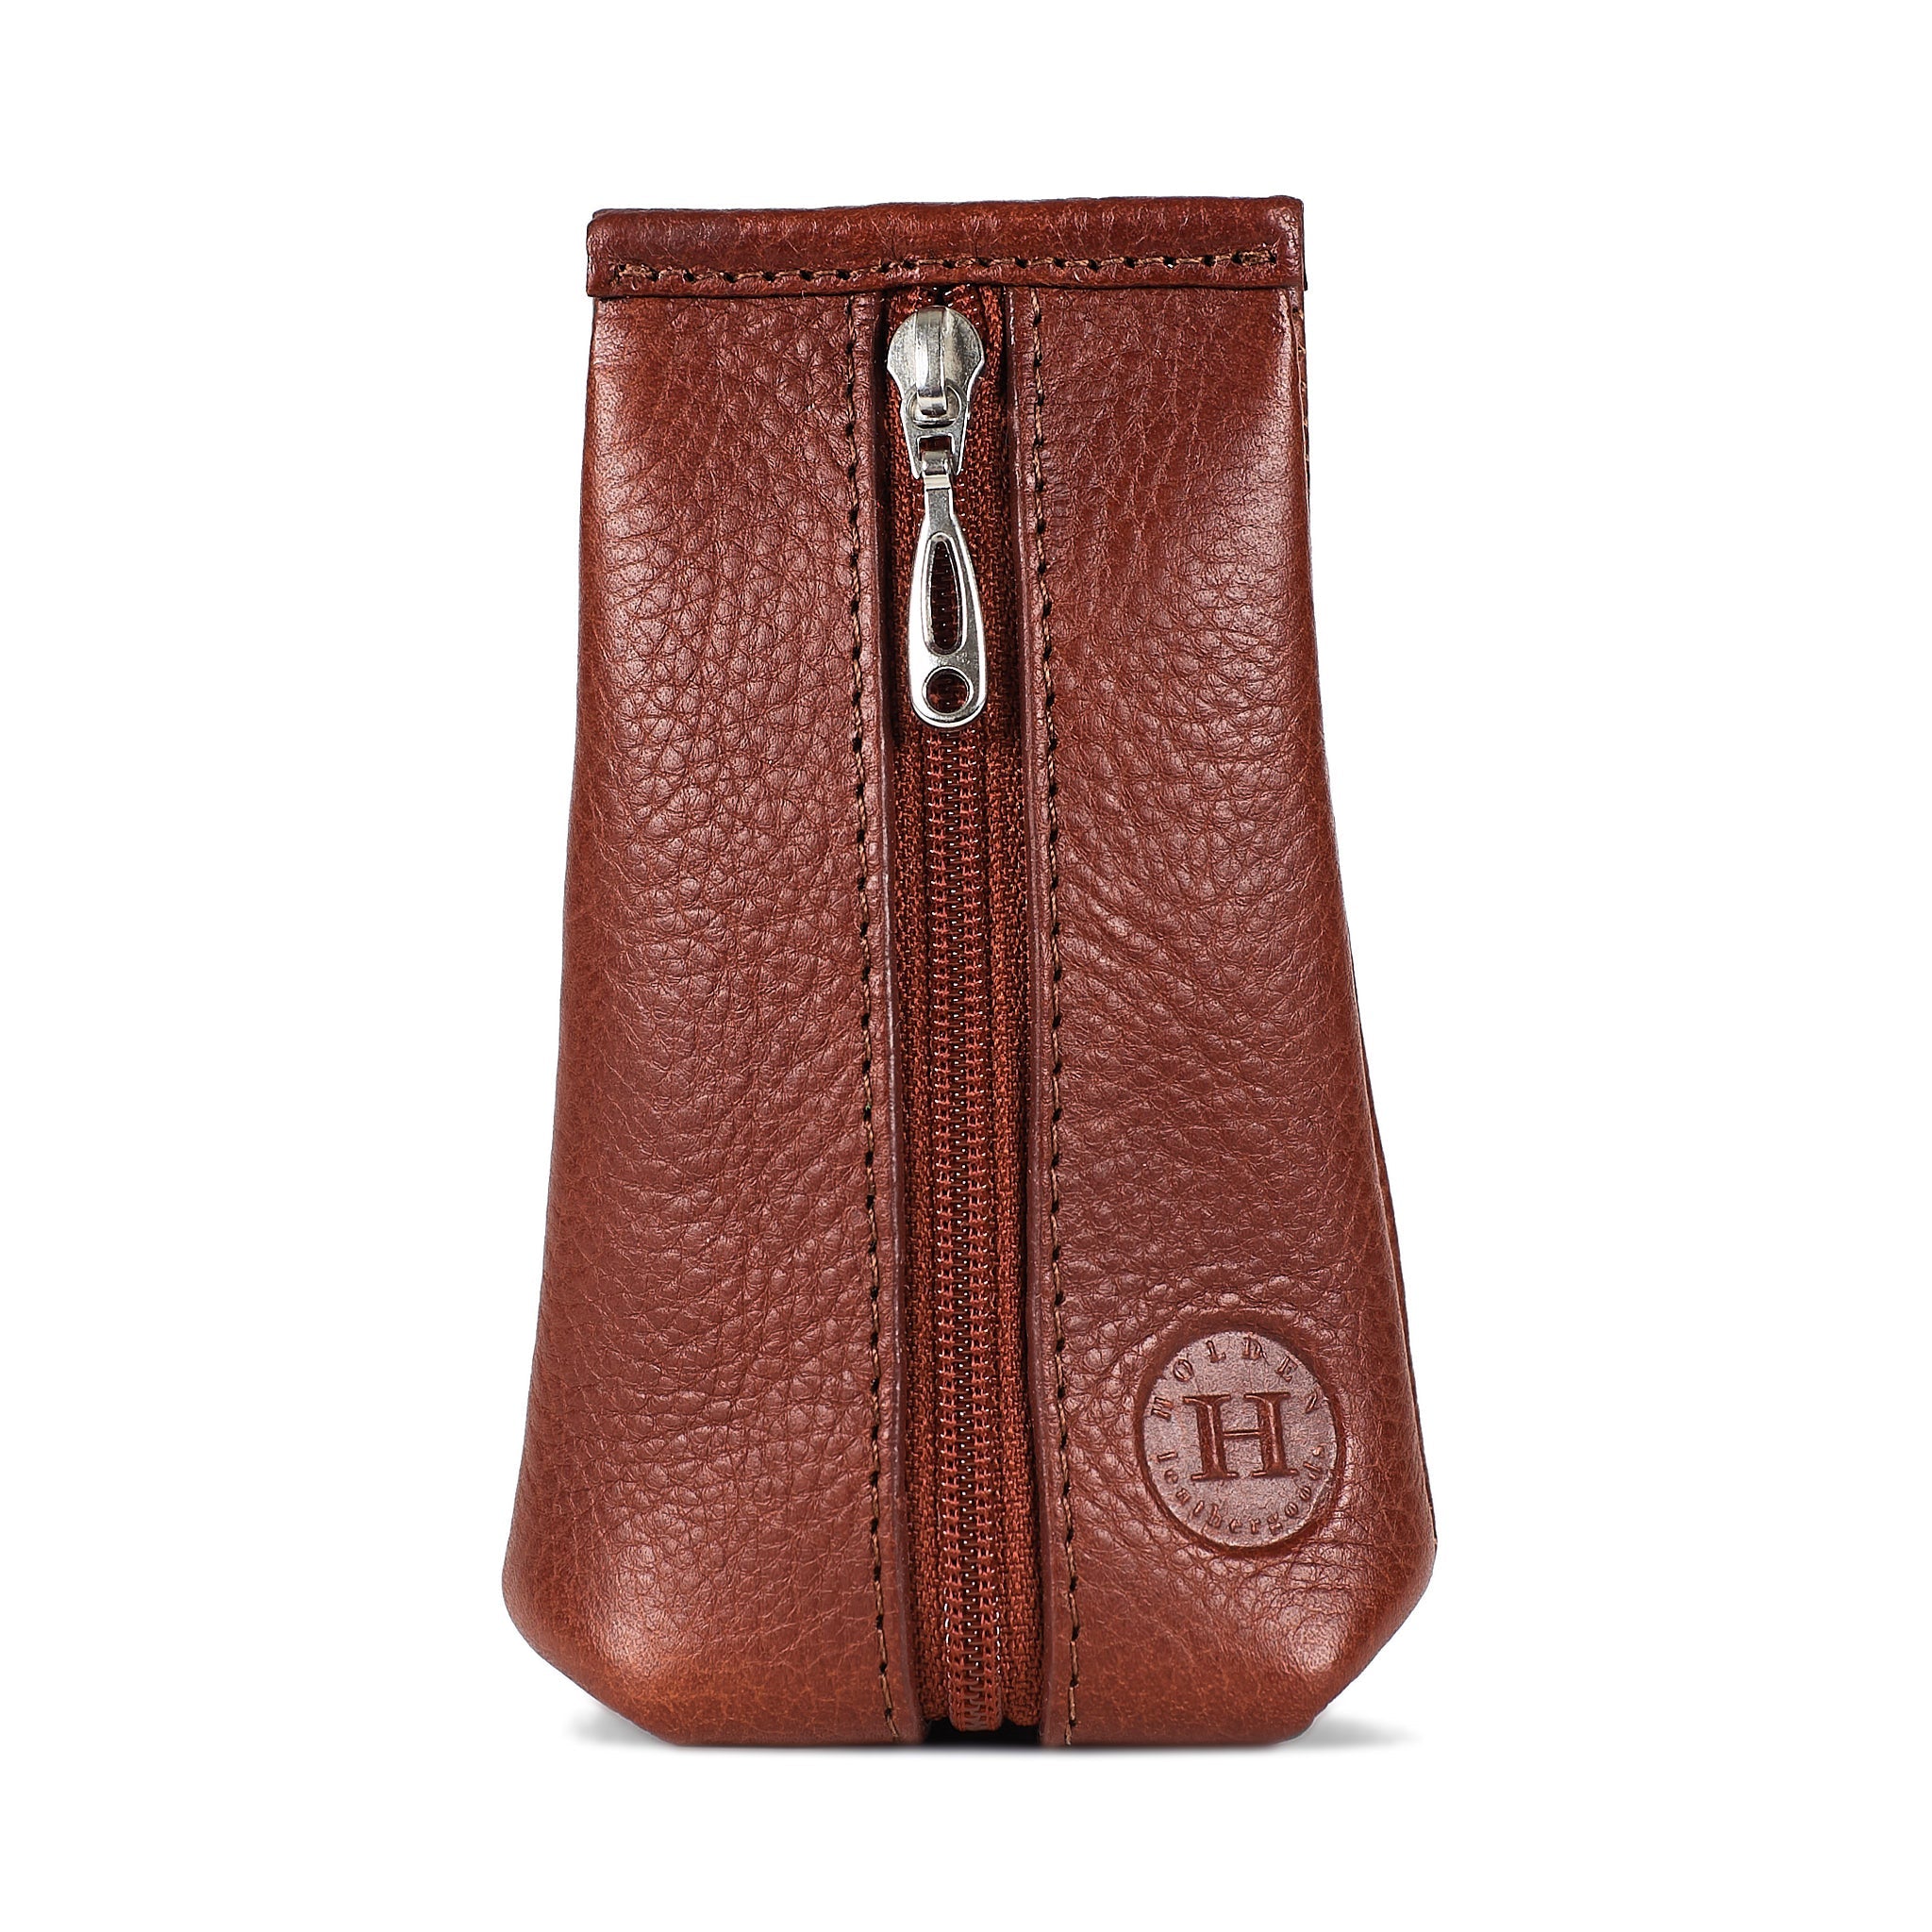 Leather Key Pouch - Chestnut Brown